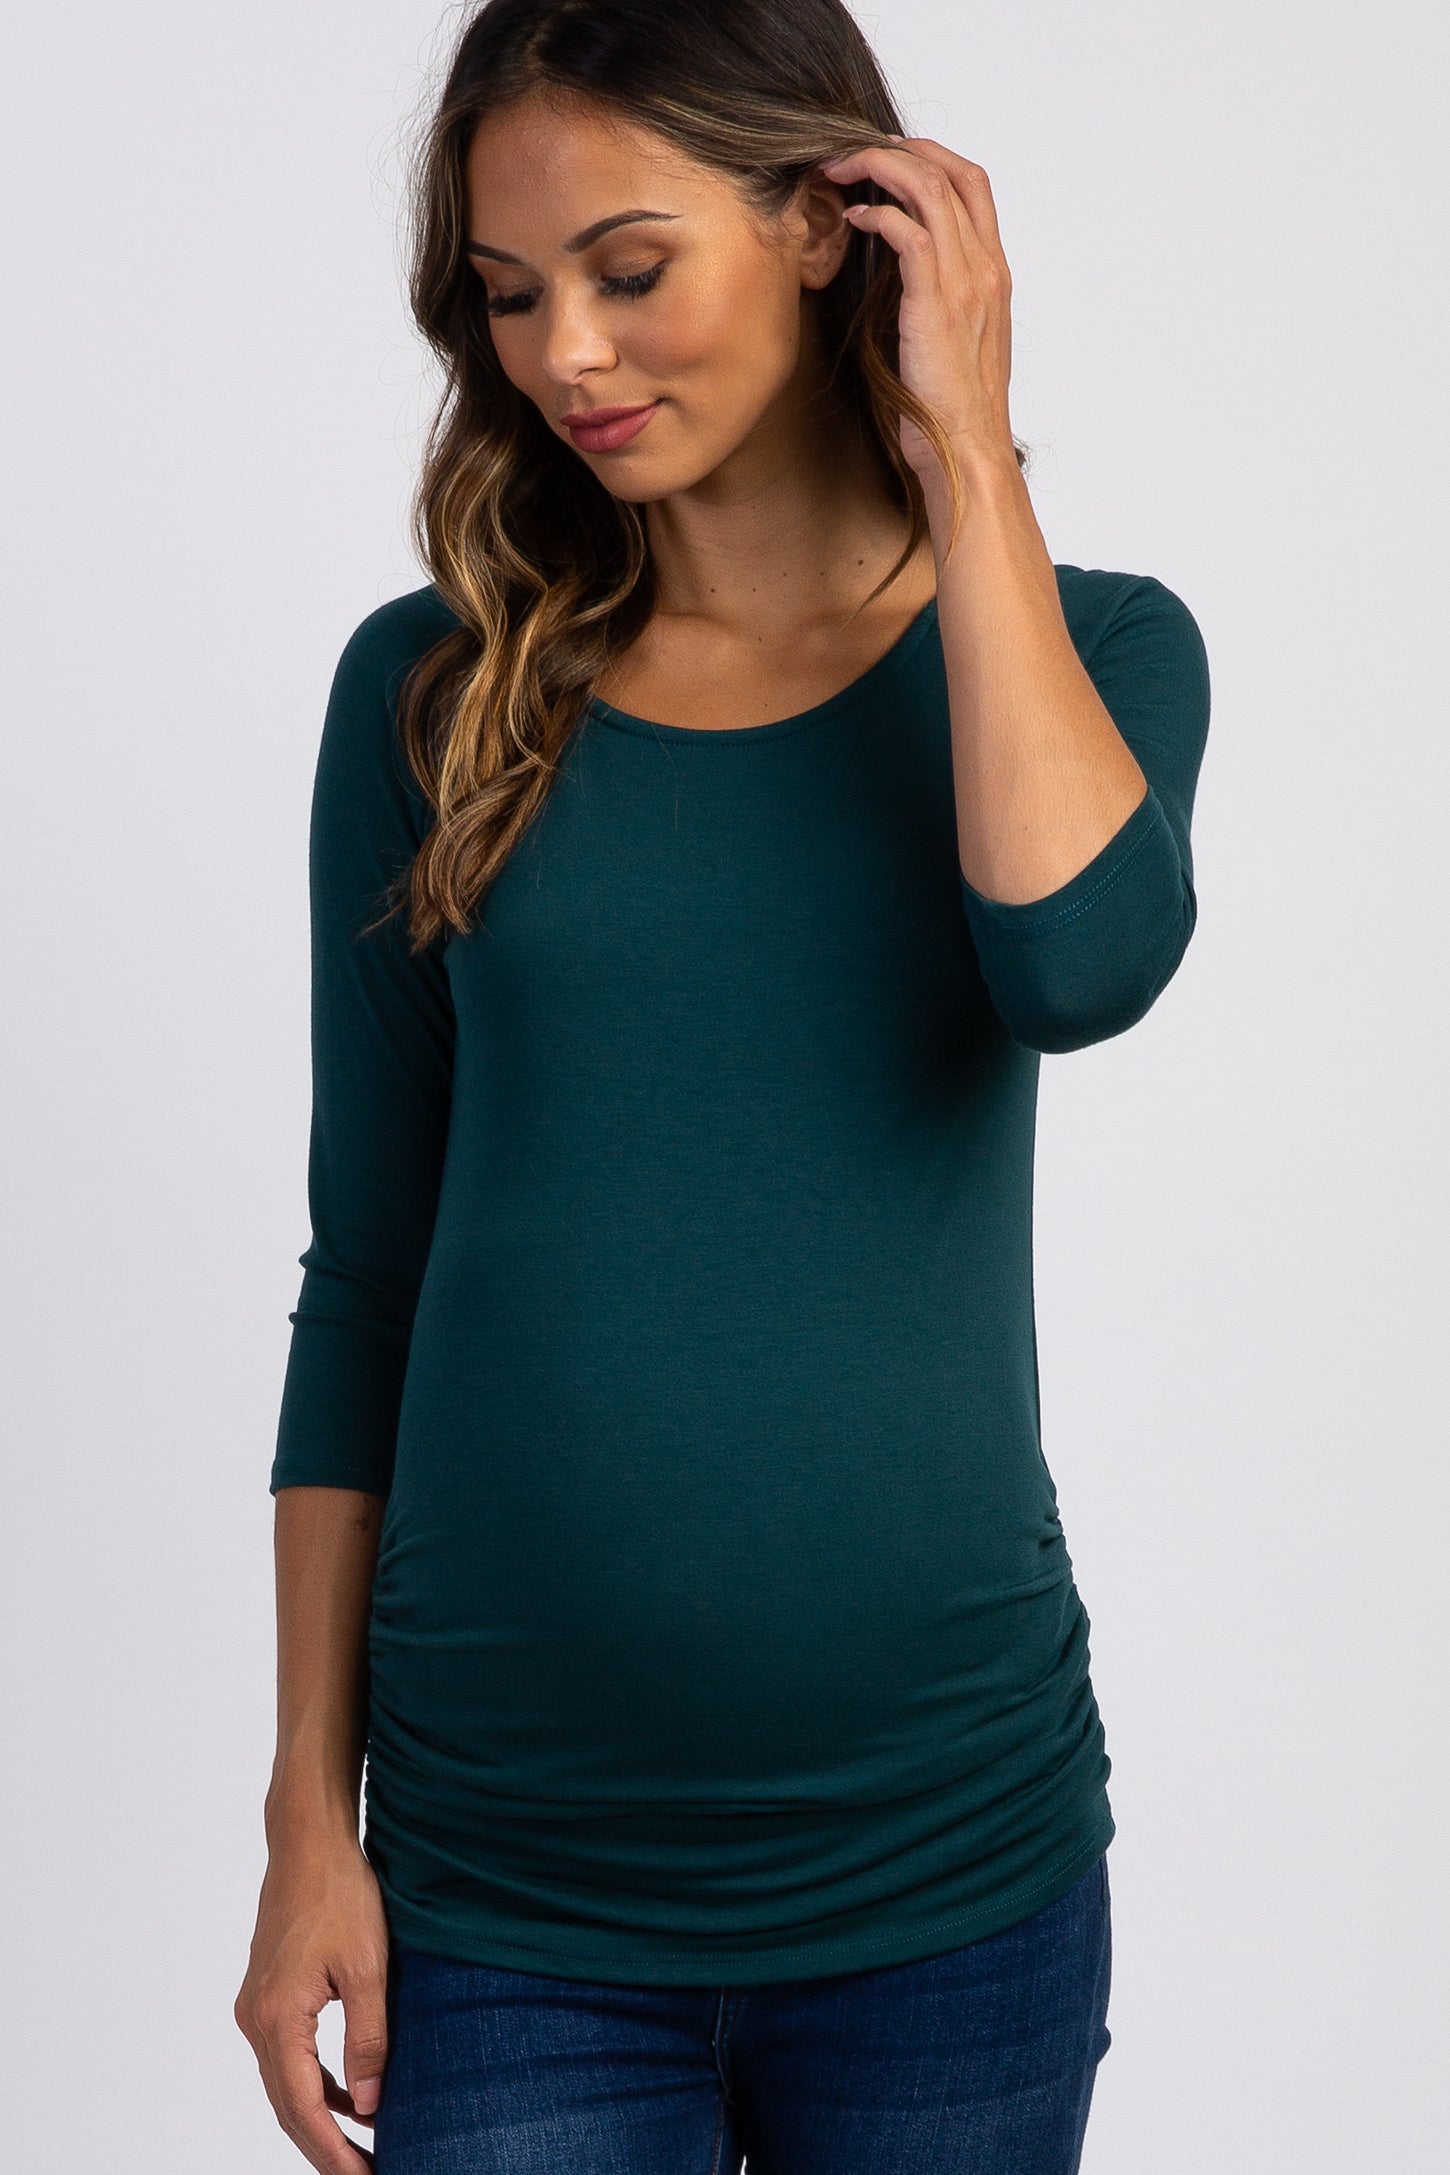 PinkBlush Forest Green Solid 3/4 Sleeve Ruched Maternity Top